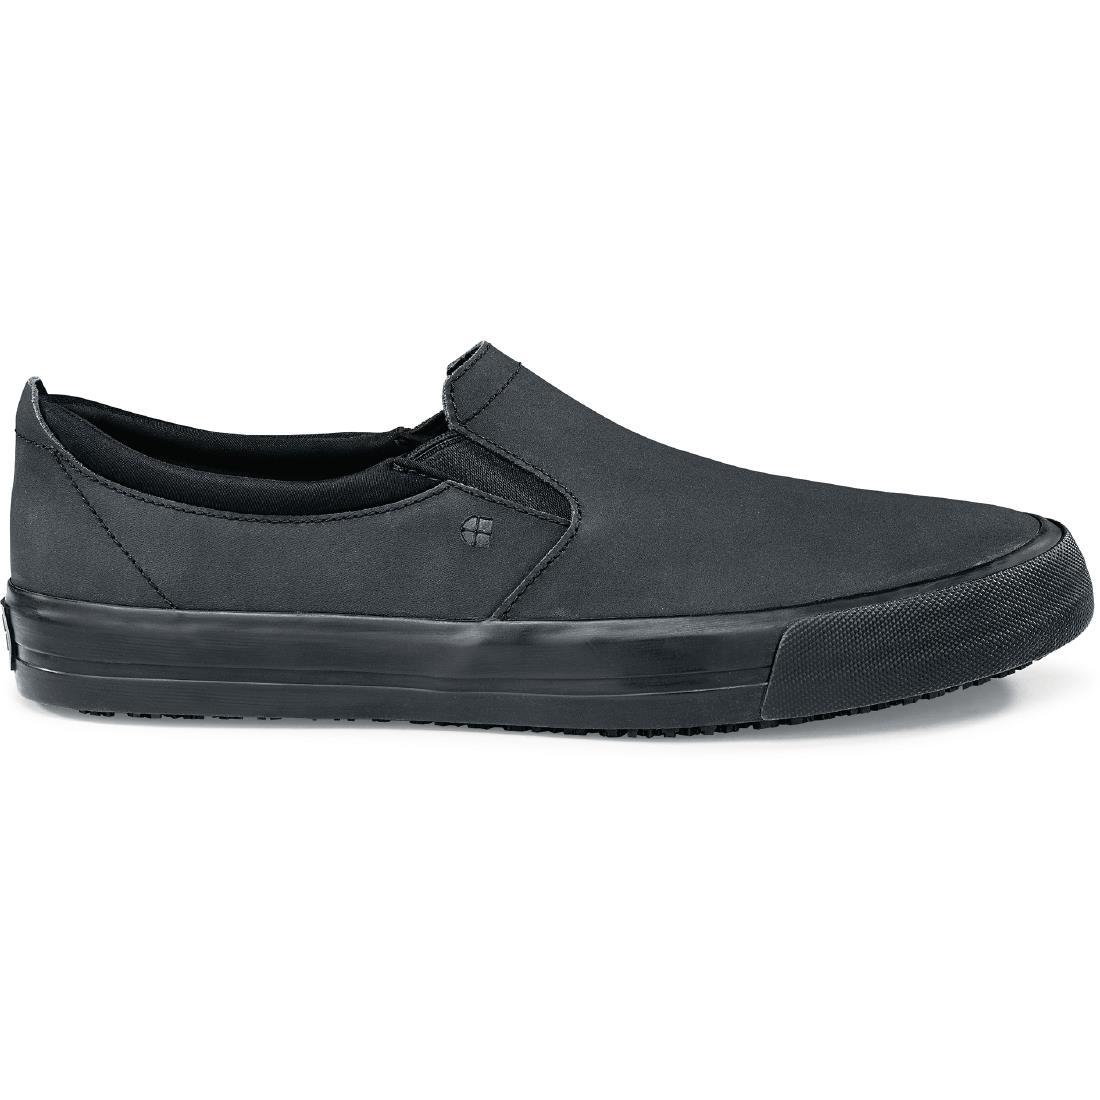 Shoes for Crews Leather Slip On Size 45 - BB163-45  - 4